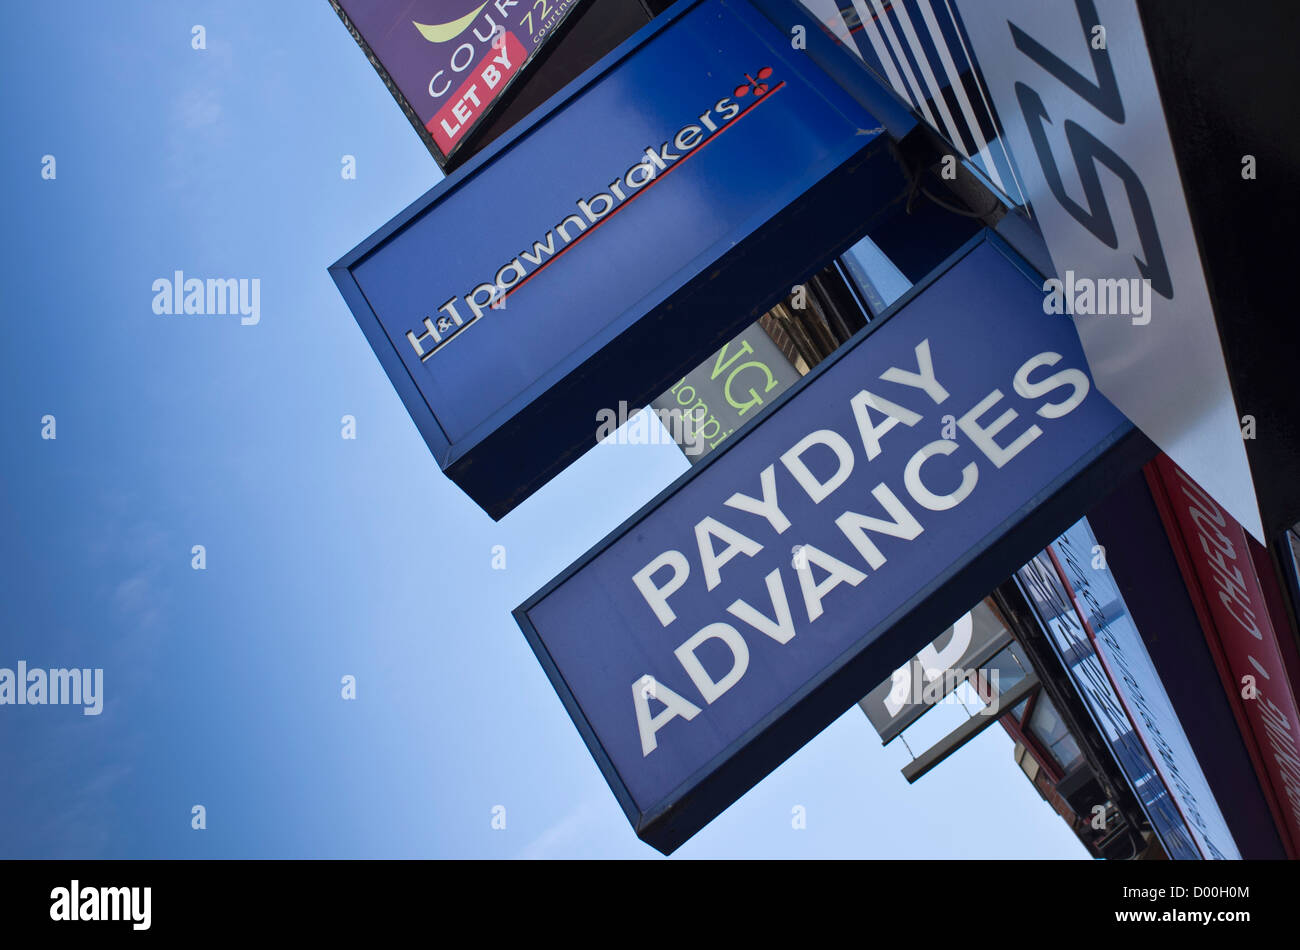 High street signs for the cash loans, payday advances and pawnbroker shops in Dalston, London, UK. Stock Photo